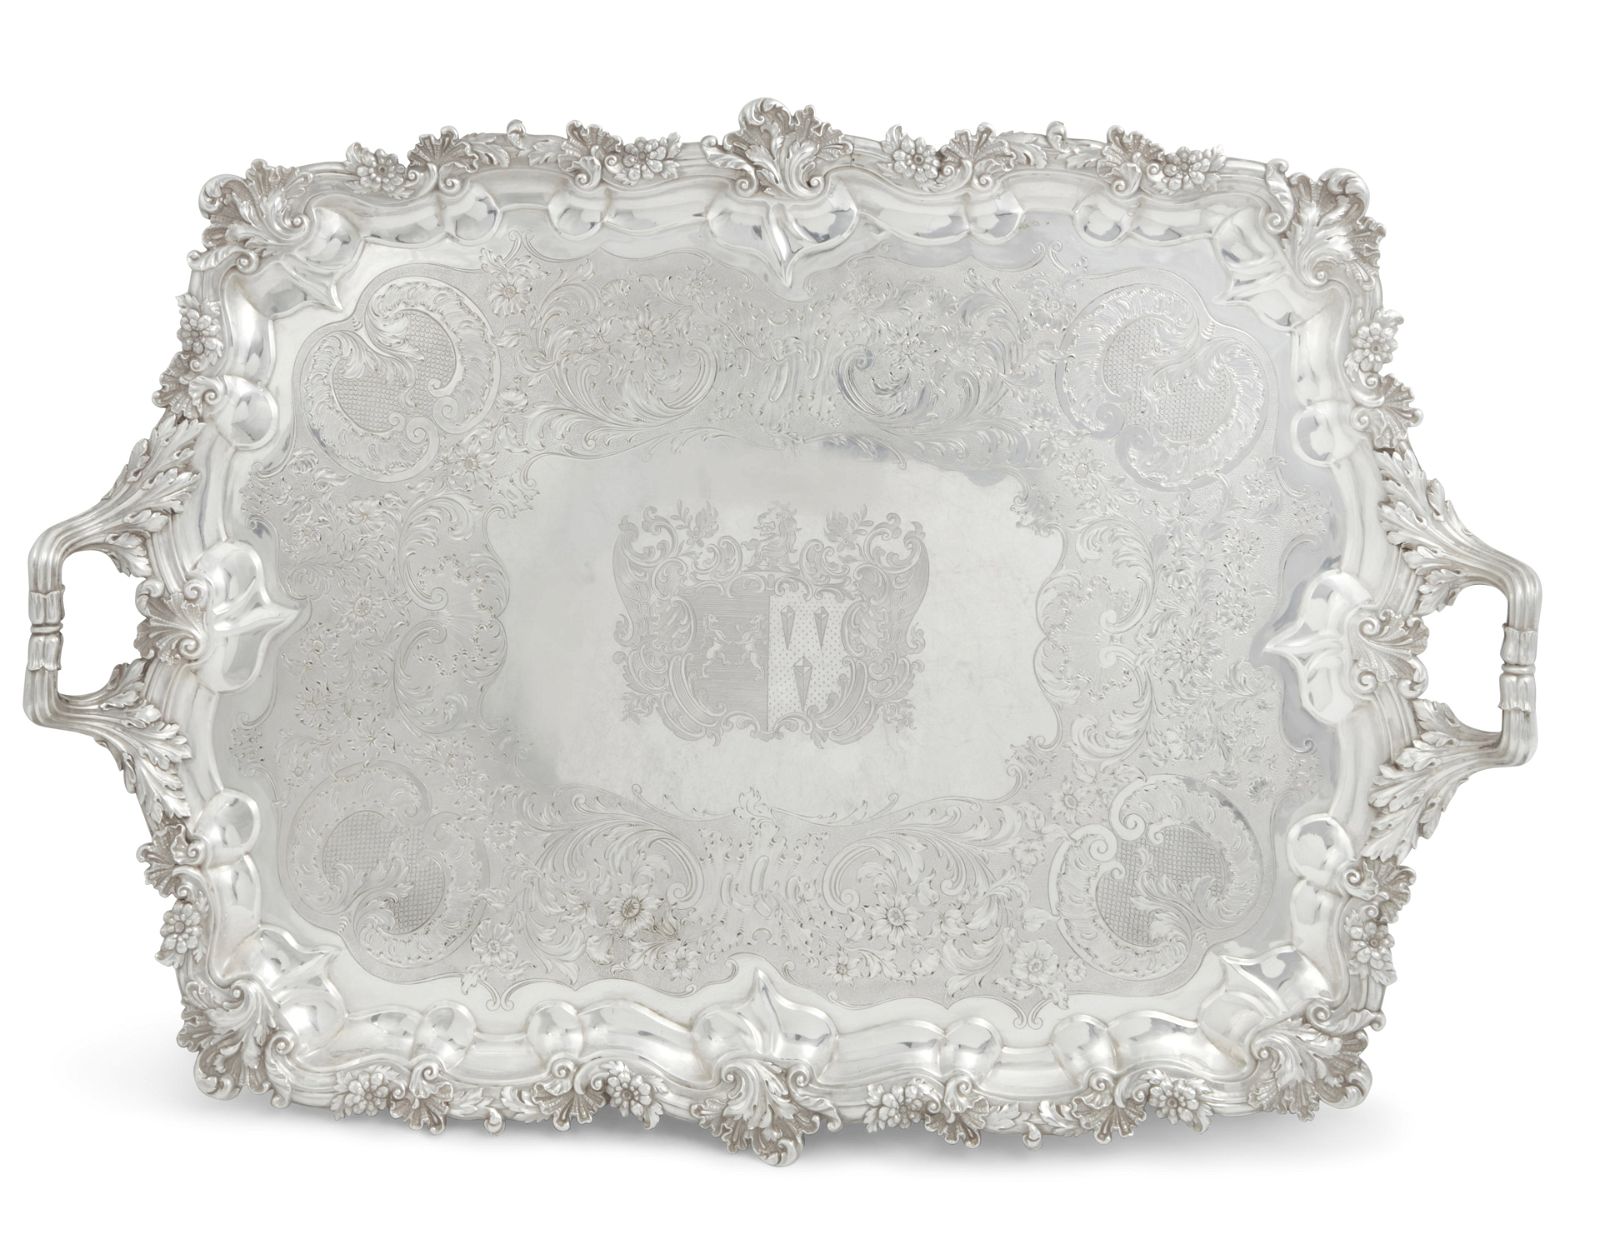 A WILLIAM IV STERLING SILVER TWO